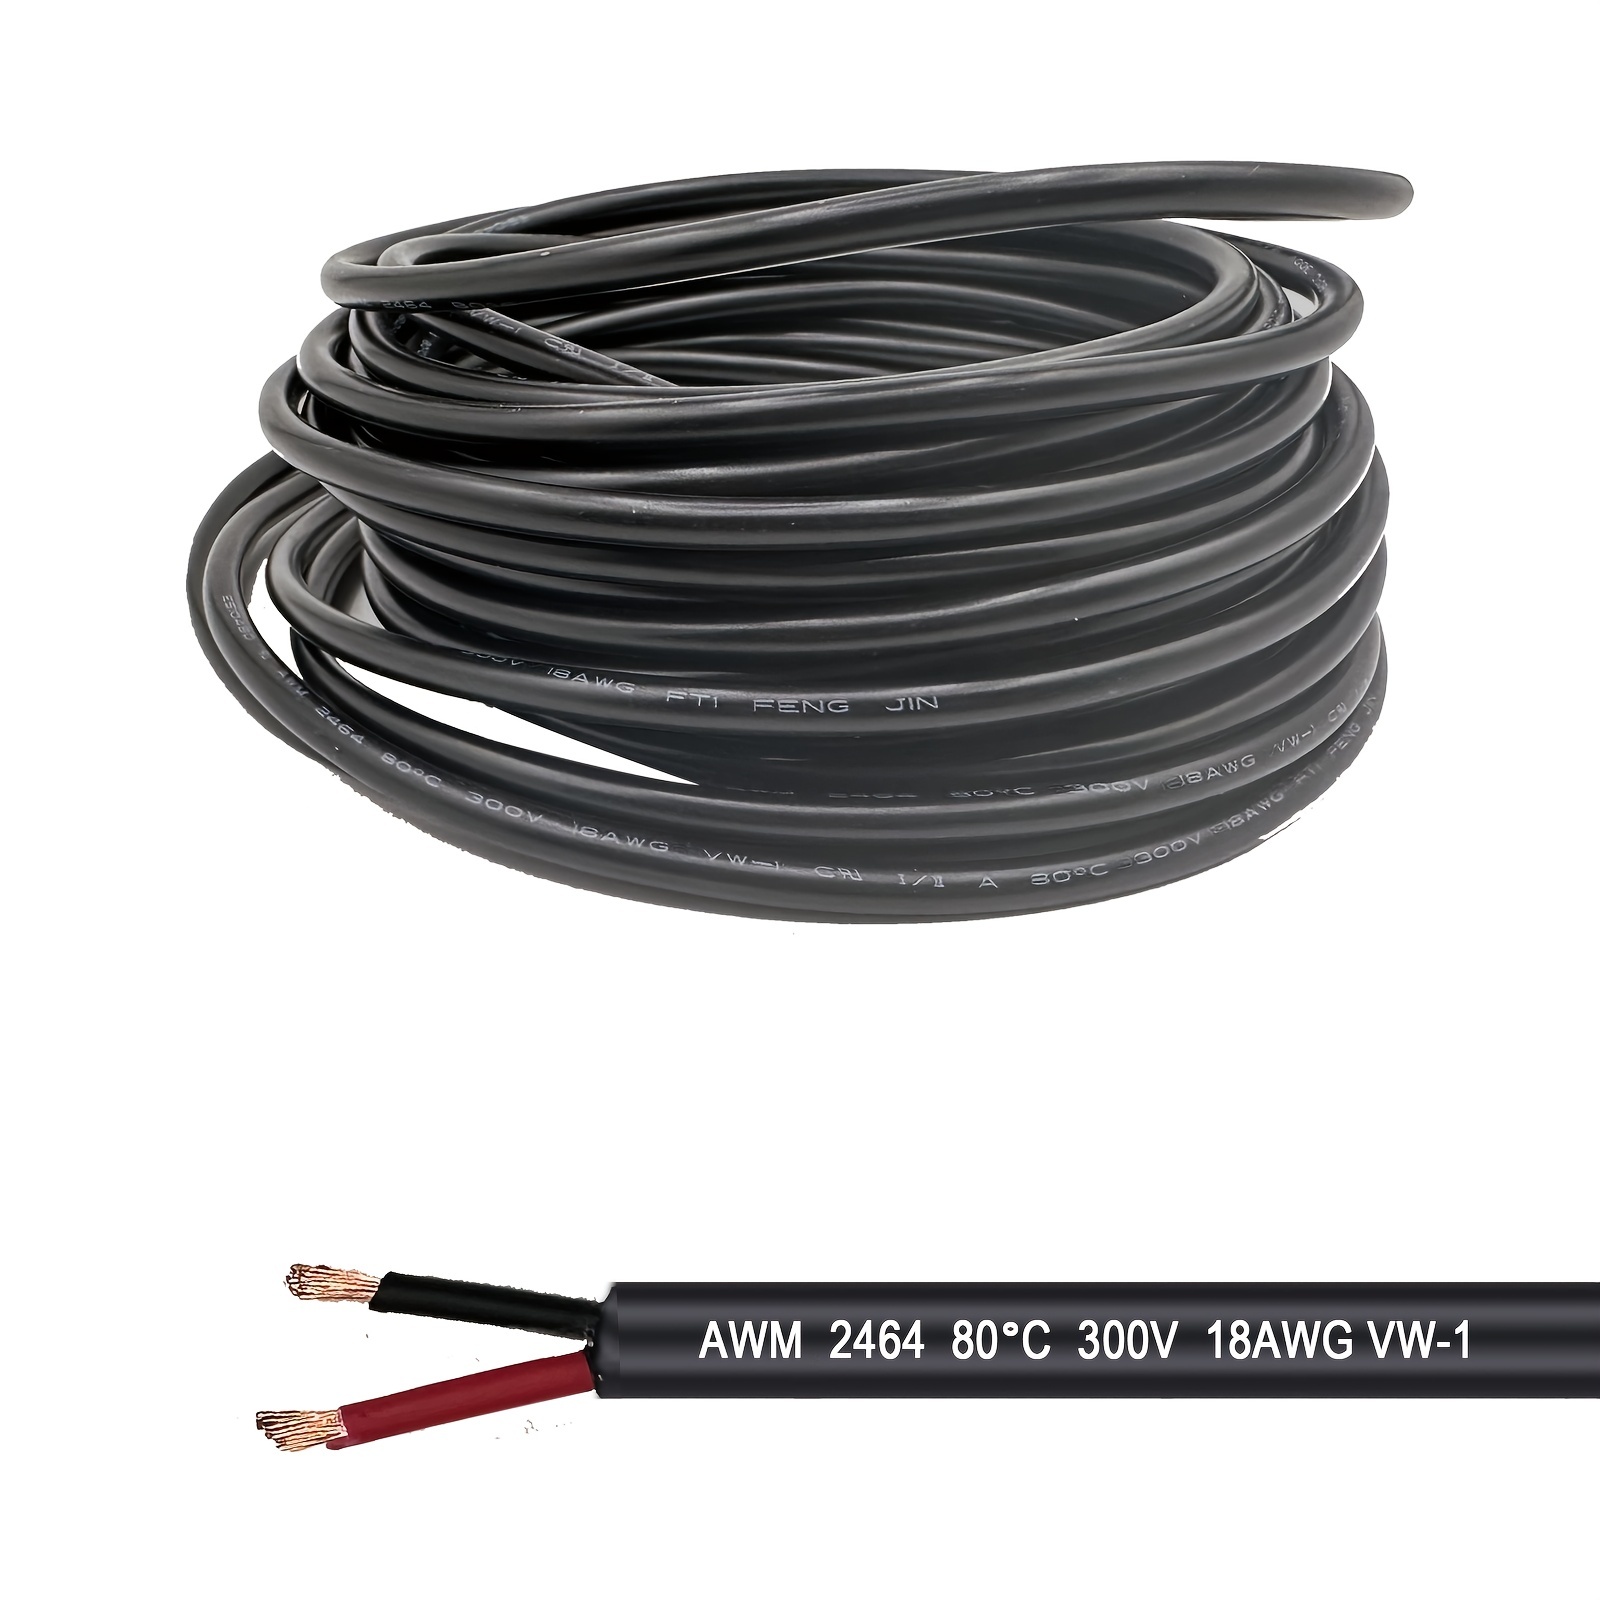 18 Gauge Wire 2 Conductor Electrical Wire 18AWG Electrical Wire Stranded  PVC Cord Oxygen-Free Copper Cable 50FT/15M for Low Voltage Landscape  Lighting